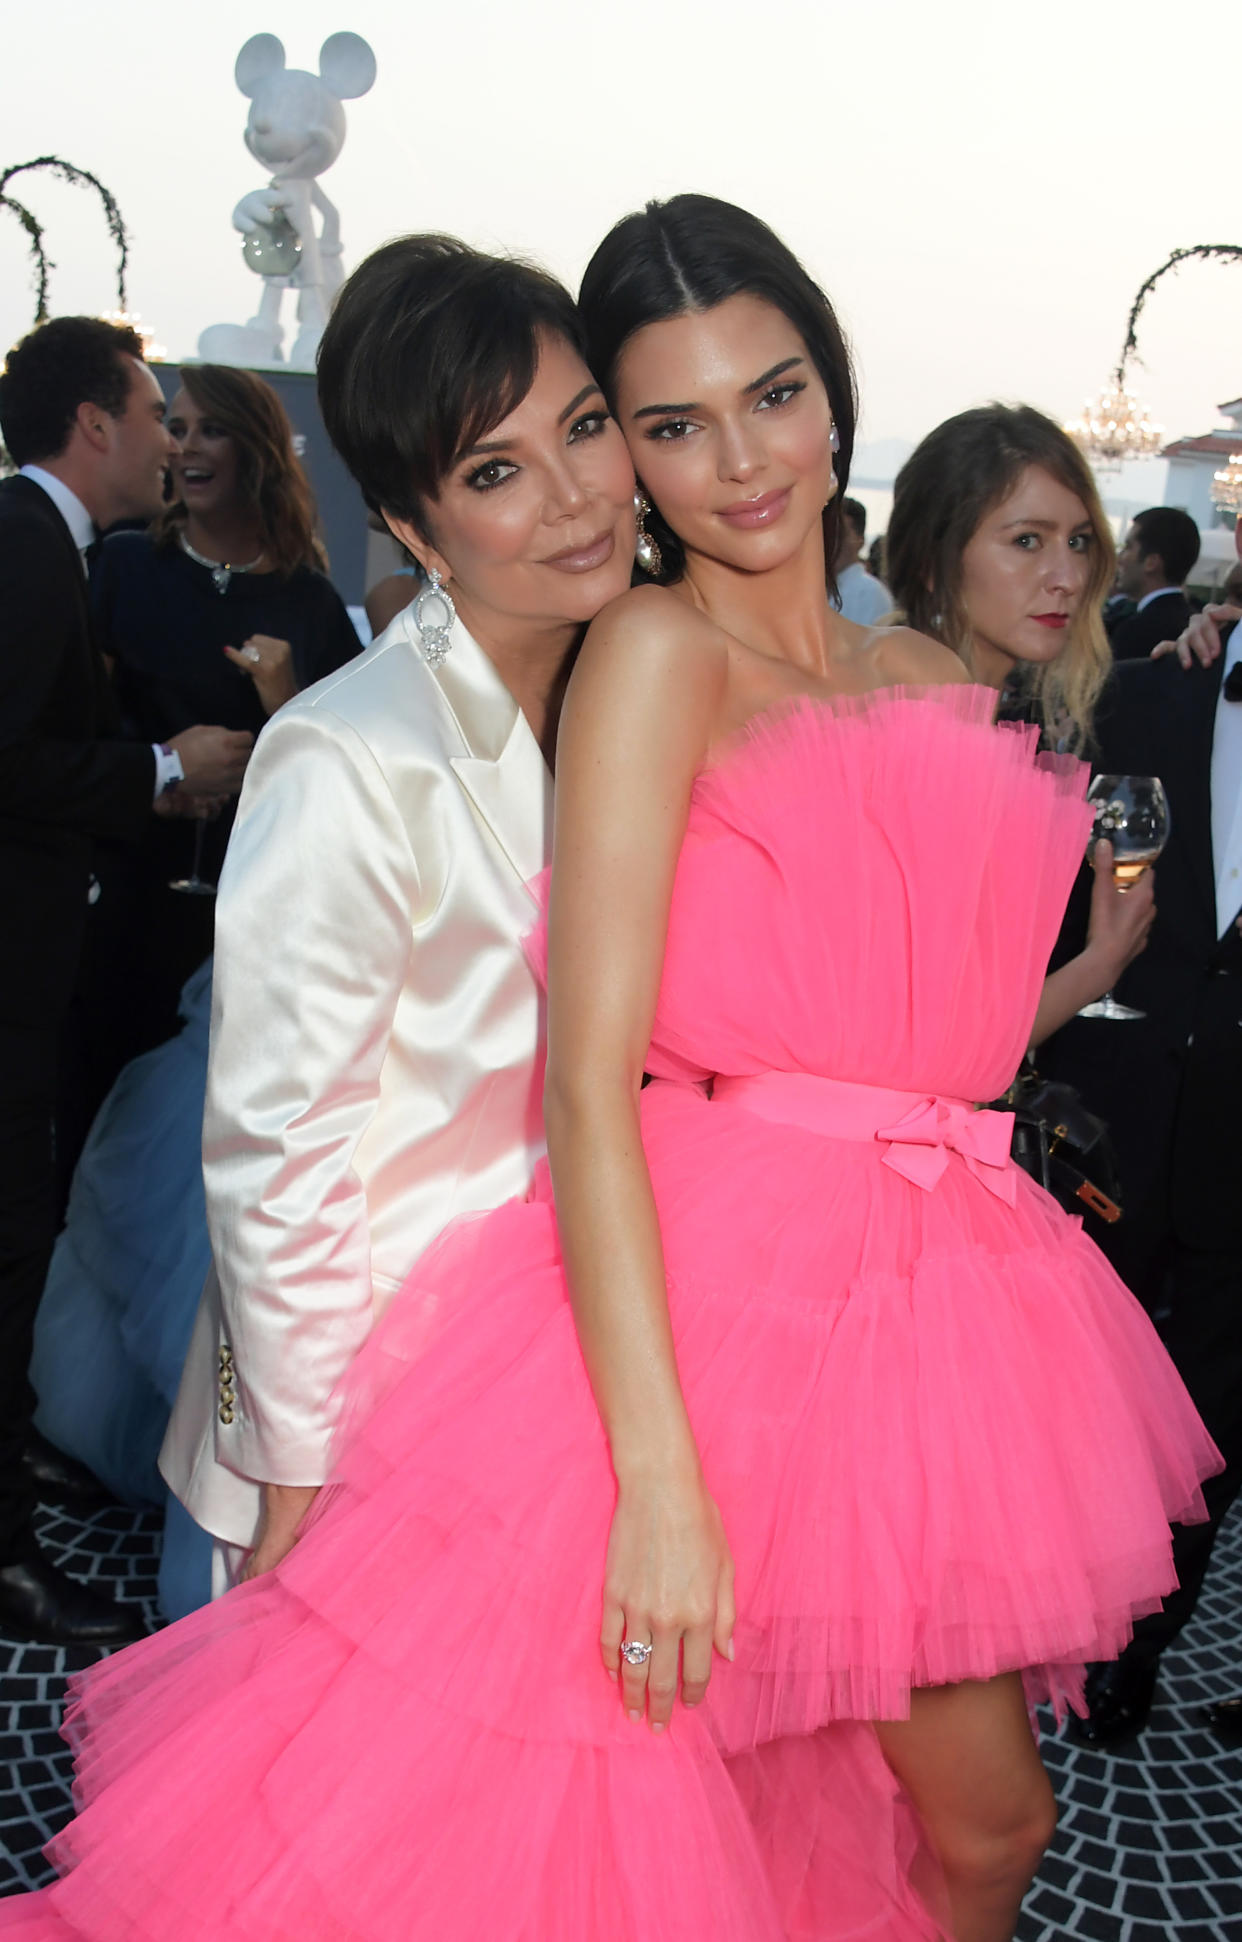 CAP D'ANTIBES, FRANCE - MAY 23:  Kris Jenner and Kendall Jenner attend the amfAR Cannes Gala 2019 at Hotel du Cap-Eden-Roc on May 23, 2019 in Cap d'Antibes, France.  (Photo by David M. Benett/Dave Benett/Getty Images for amfAR)